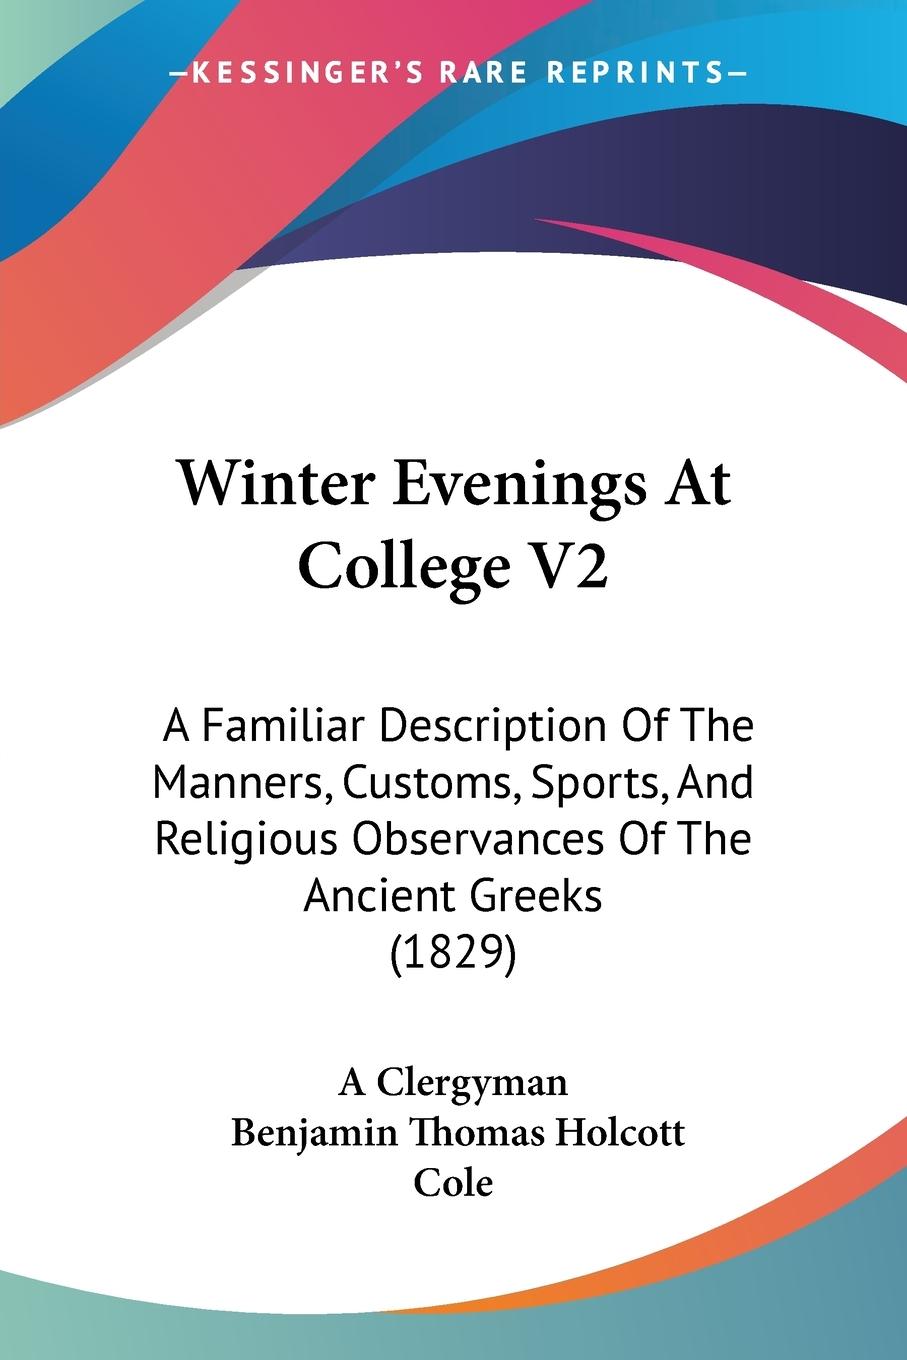 Winter Evenings At College V2 - A Clergyman Cole, Benjamin Thomas Holcott